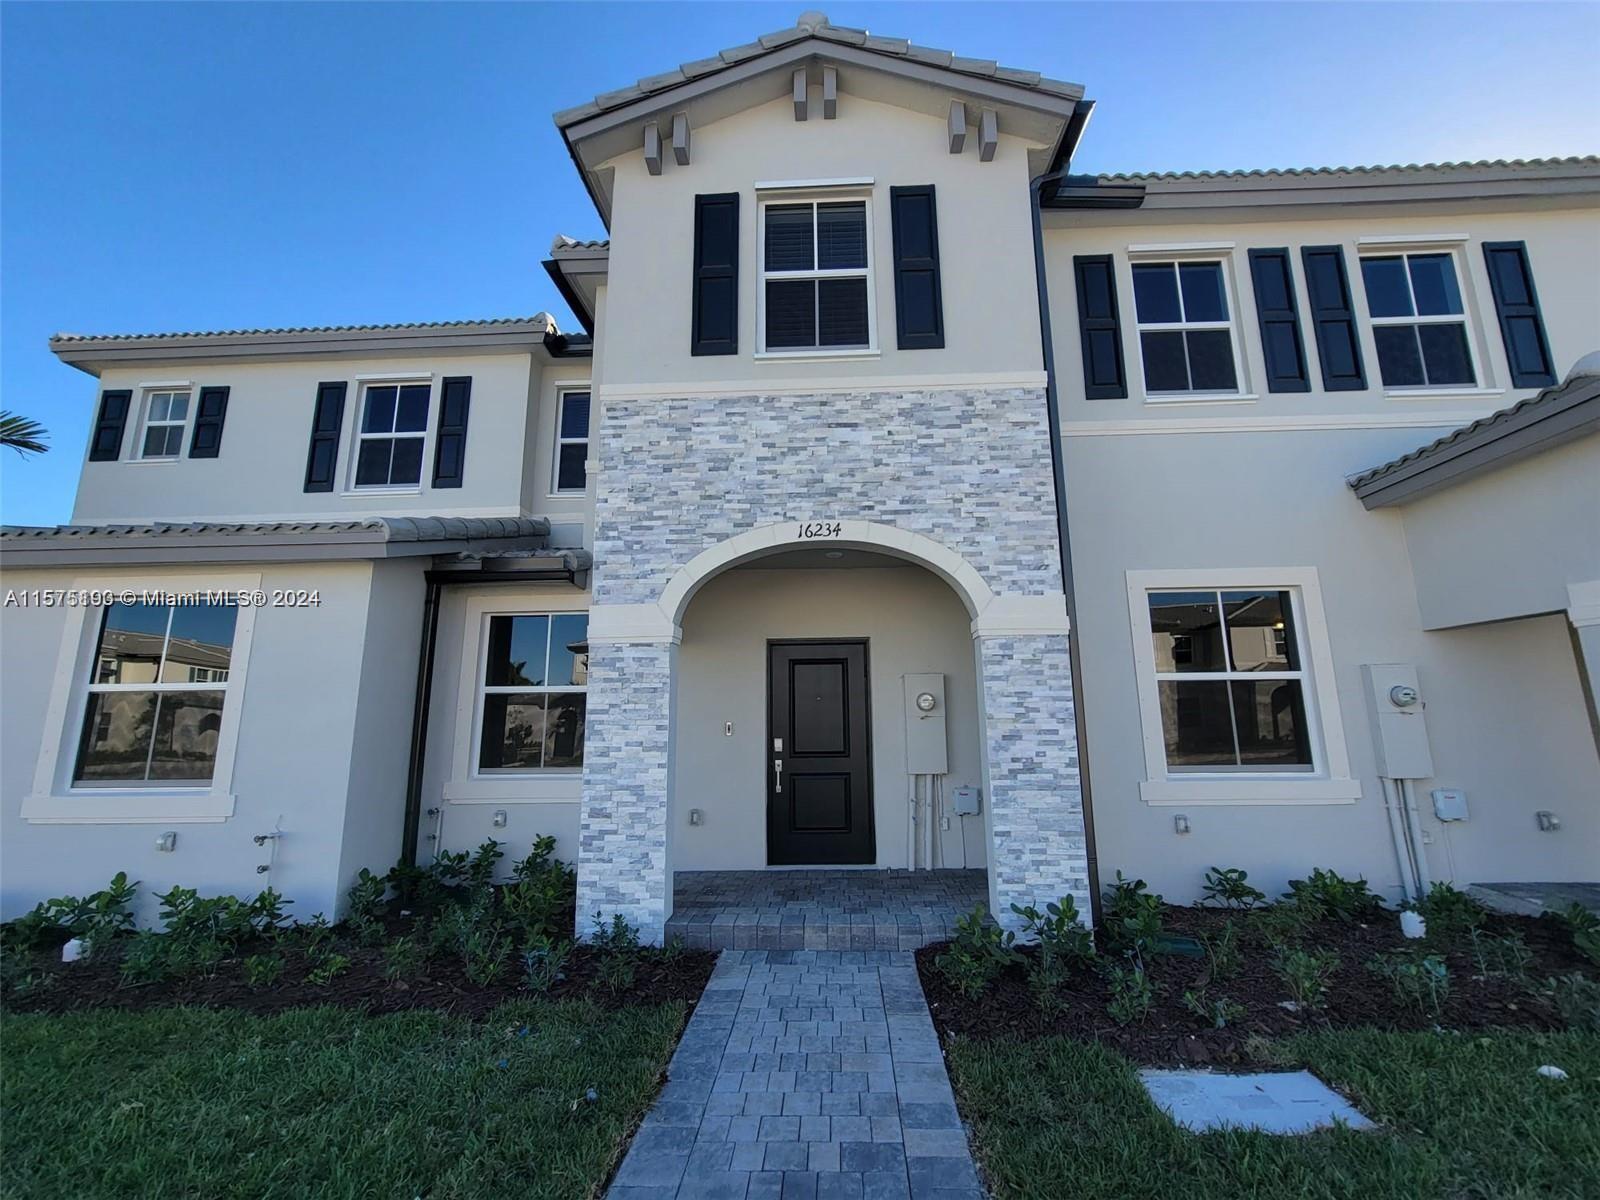 Spacious, bright, brand new construction townhome located in Lennar's new community named Cedar Pointe in Homestead. Upgraded with tile throughout entire 1st floor. 3 bedrooms / 2.5 baths home with no neighboring unit in the backyard. Spacious private fenced in backyard, Large open kitchen floorplpan with stainless steel appliances and recessed lighting. Washer and Dryer included. Secured home with RING camera preinstalled and FREE HiSPeed Internet Service (1.2GB). Conveniently located close to homestead speedway, restaurants, shopping, and florida turnpike.